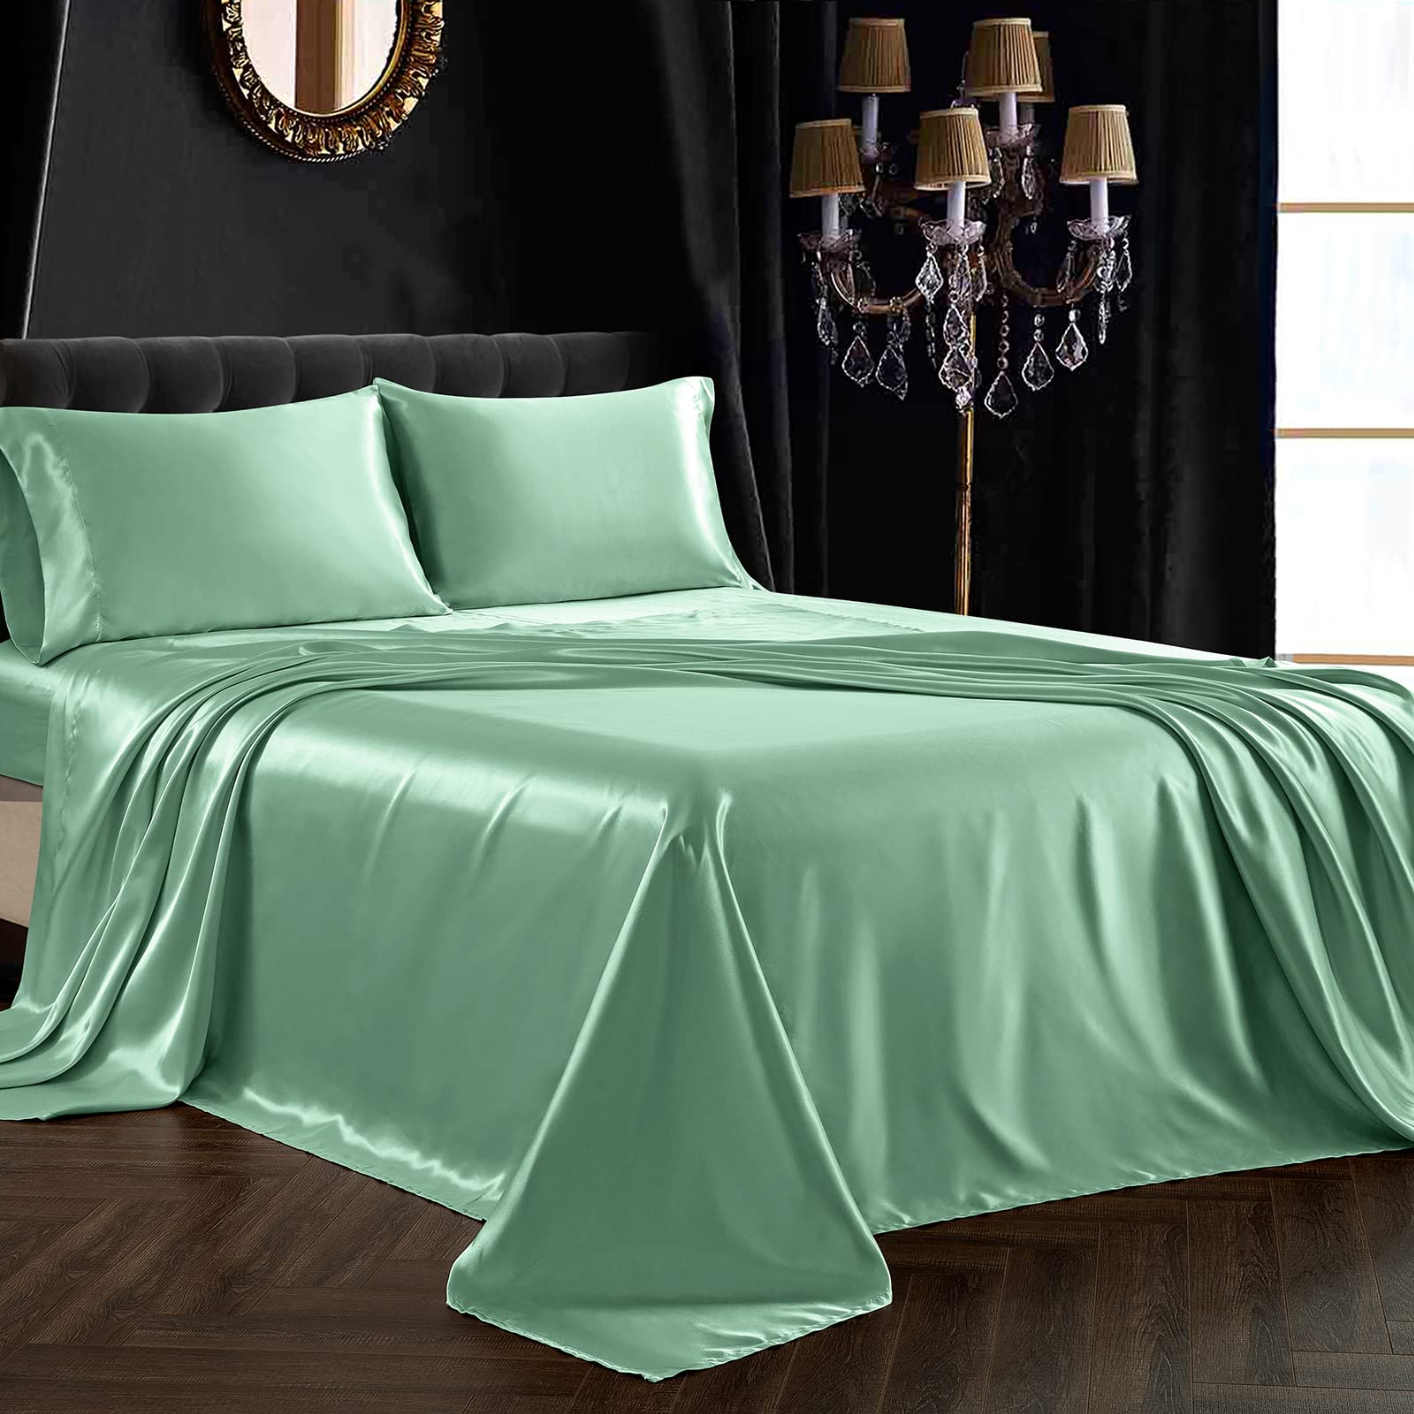 JT013-39 Twin XL Sheets 4pcs XL Twin Sheet Set Twin XL Fitted Sheet Extra Long Twin Sheets Soft and Long Lasting 100% Fine Brushed Microfiber Polyester
